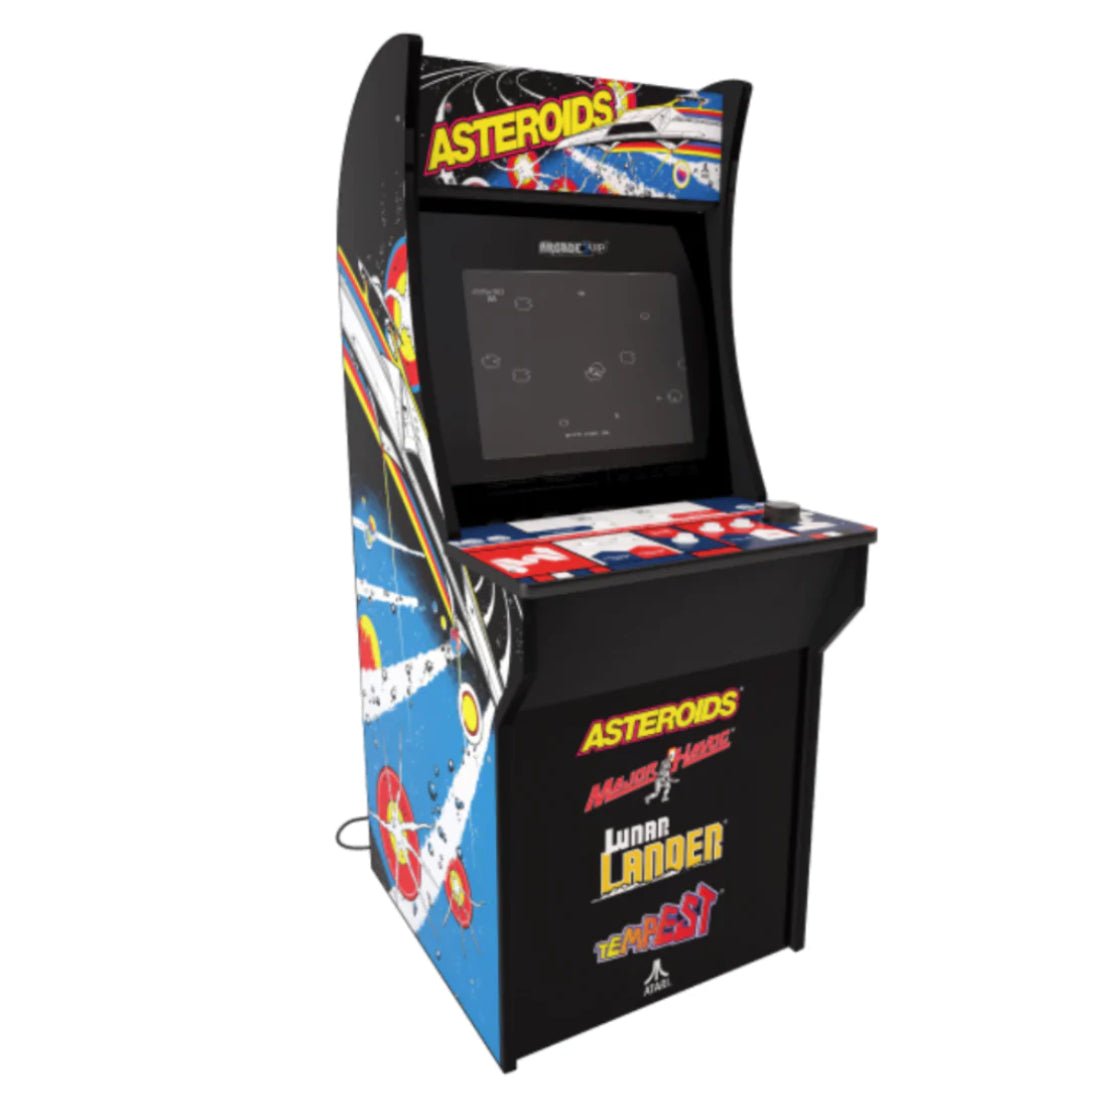 Arcade1up Asteroids Arcade Cabinet - Store 974 | ستور ٩٧٤